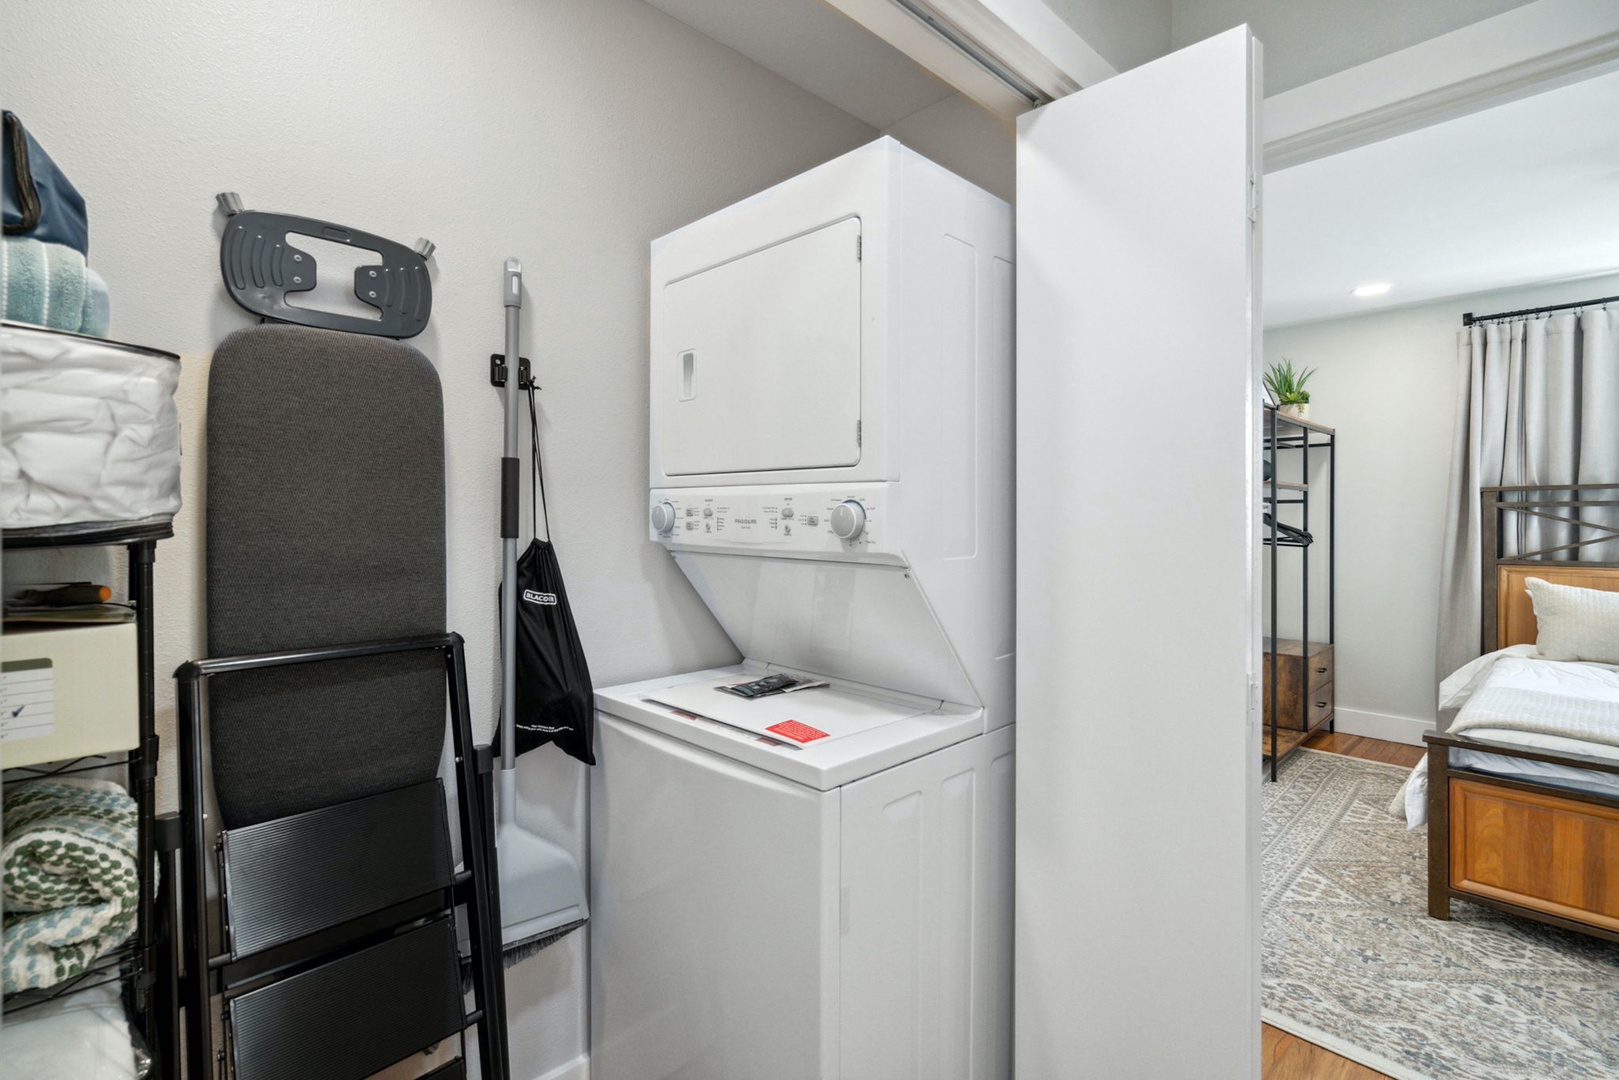 Private laundry is available for your stay, tucked away near the full bath